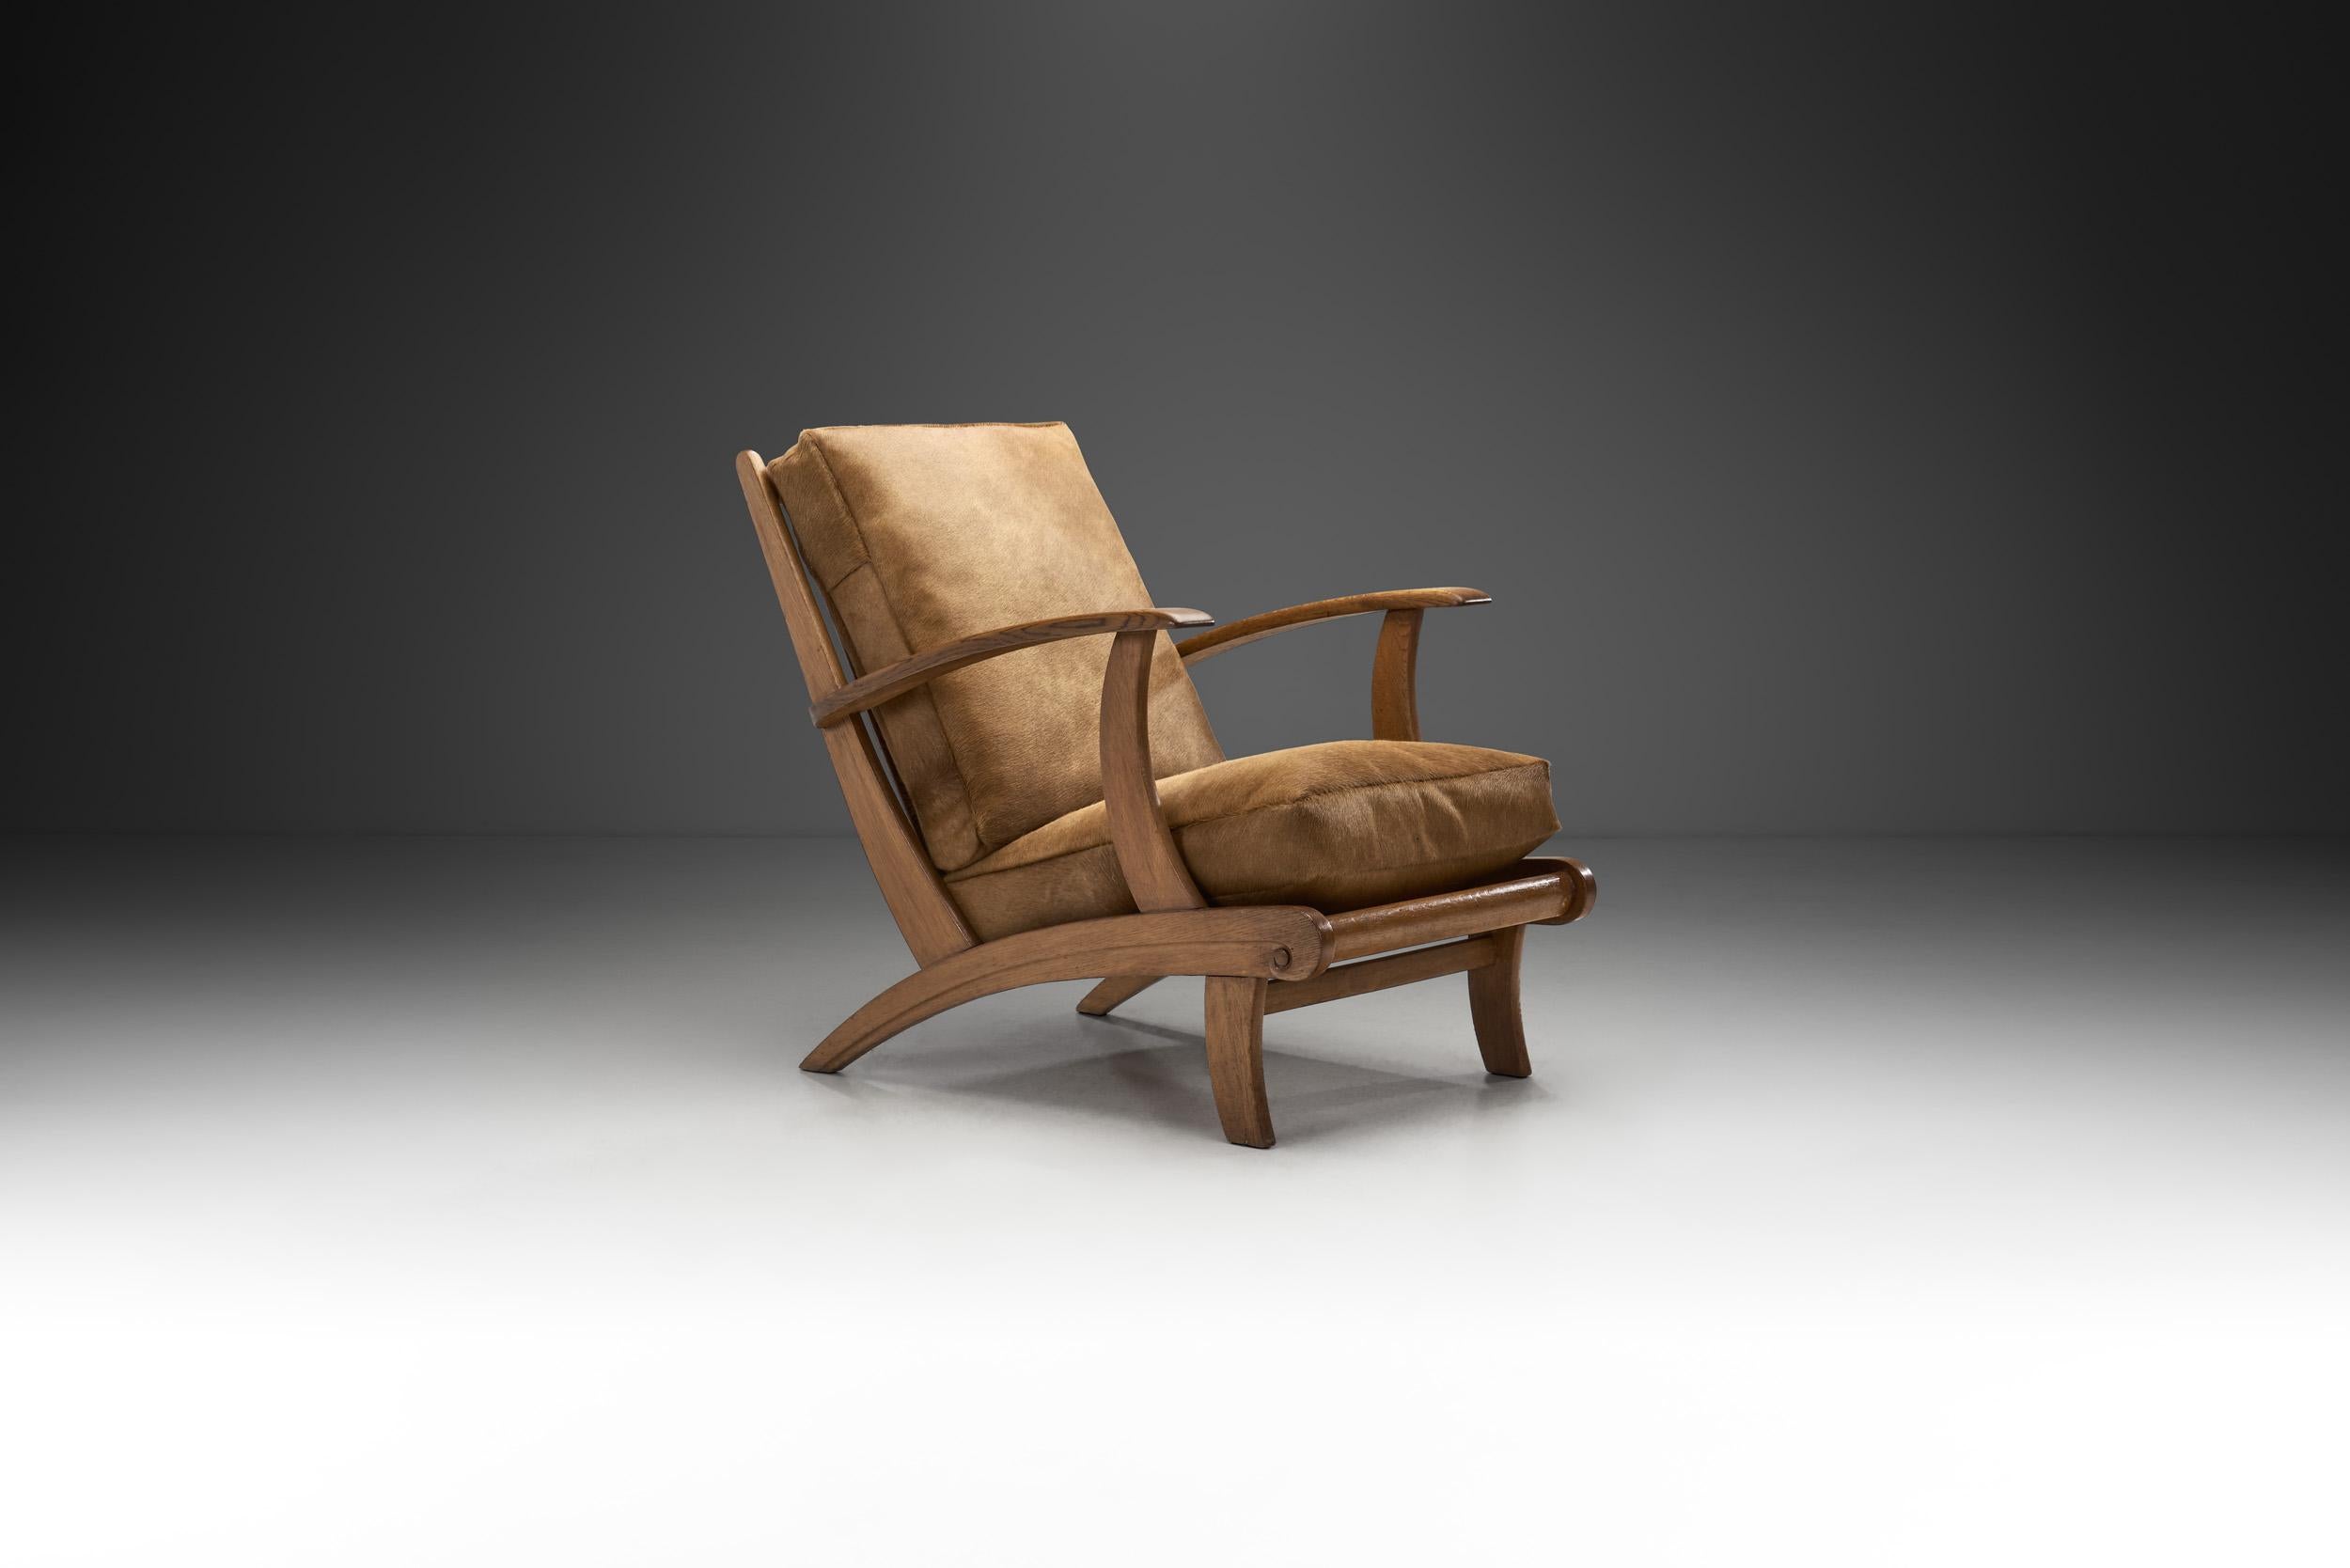 This chair is full of exceptional features and details that make it a unique example of the creative overflow that defined mid-century modernism in Europe. The sculptural design is paired with the organicity of the material and various